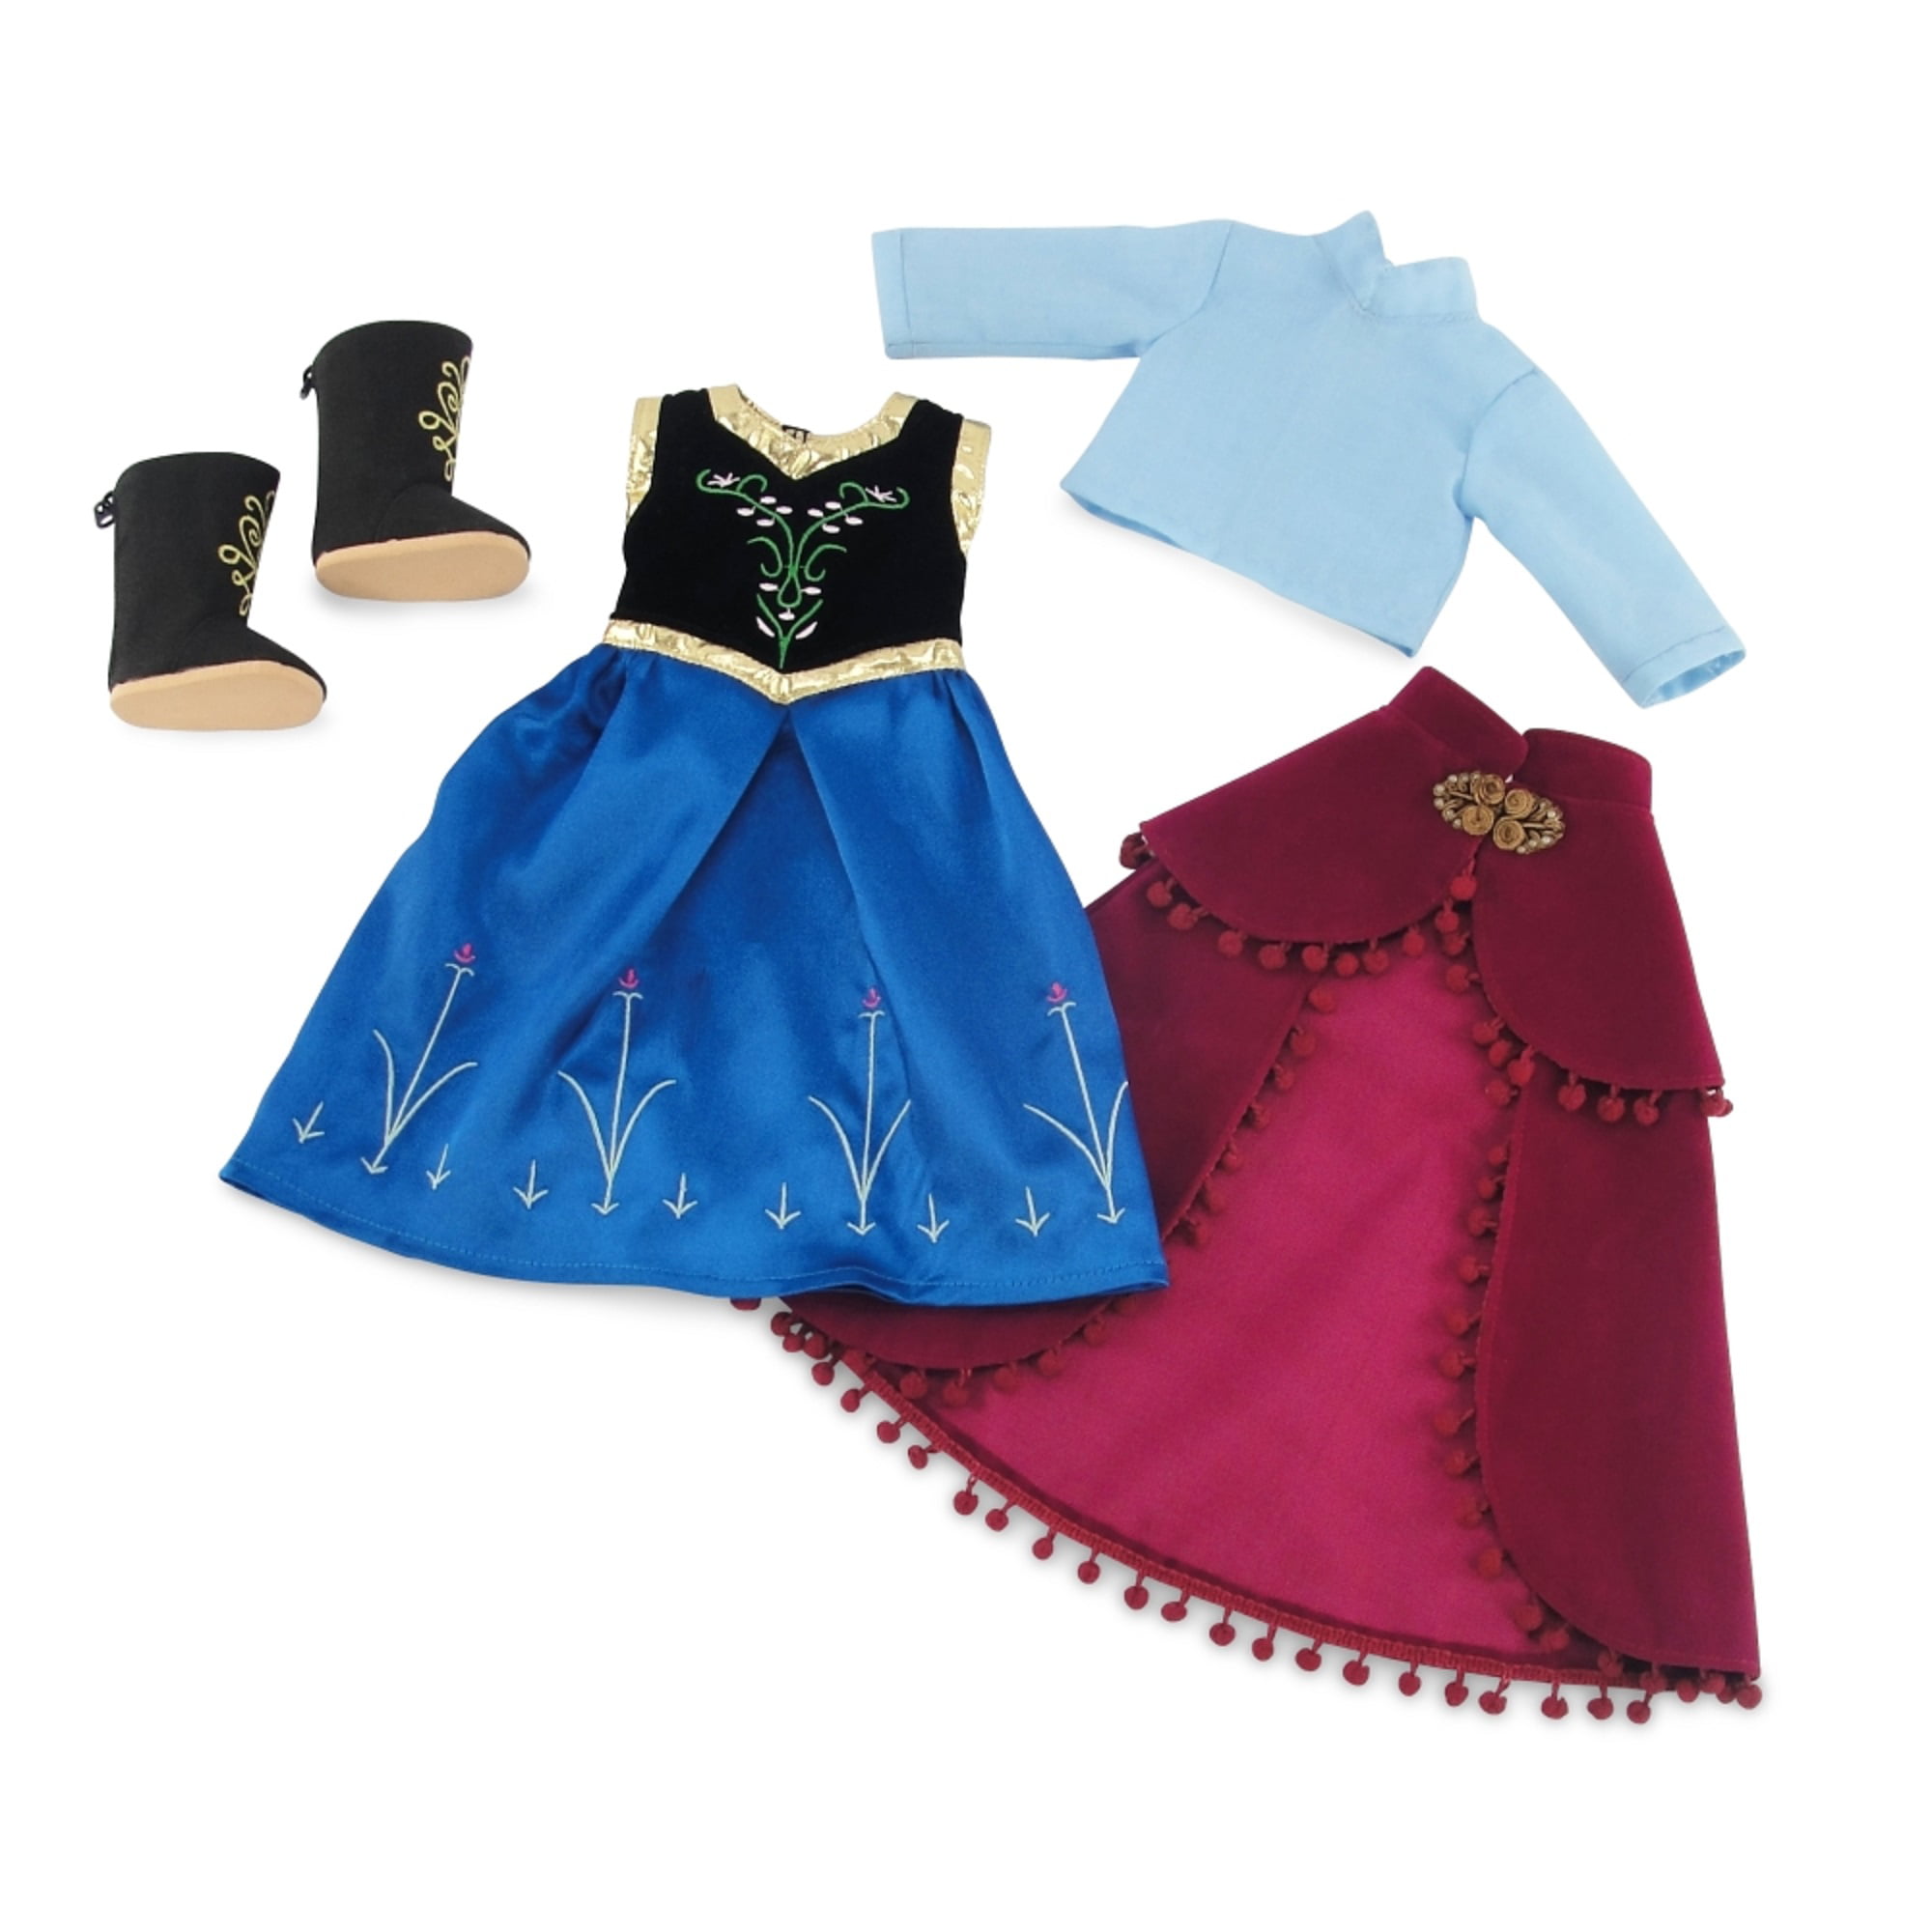 Fits 14 American Girl Wellie Wishers and Glitter Girls Dolls Princess Anna Frozen Inspired Dress with Embroidered Boots Emily Rose 14 Inch Doll Clothes